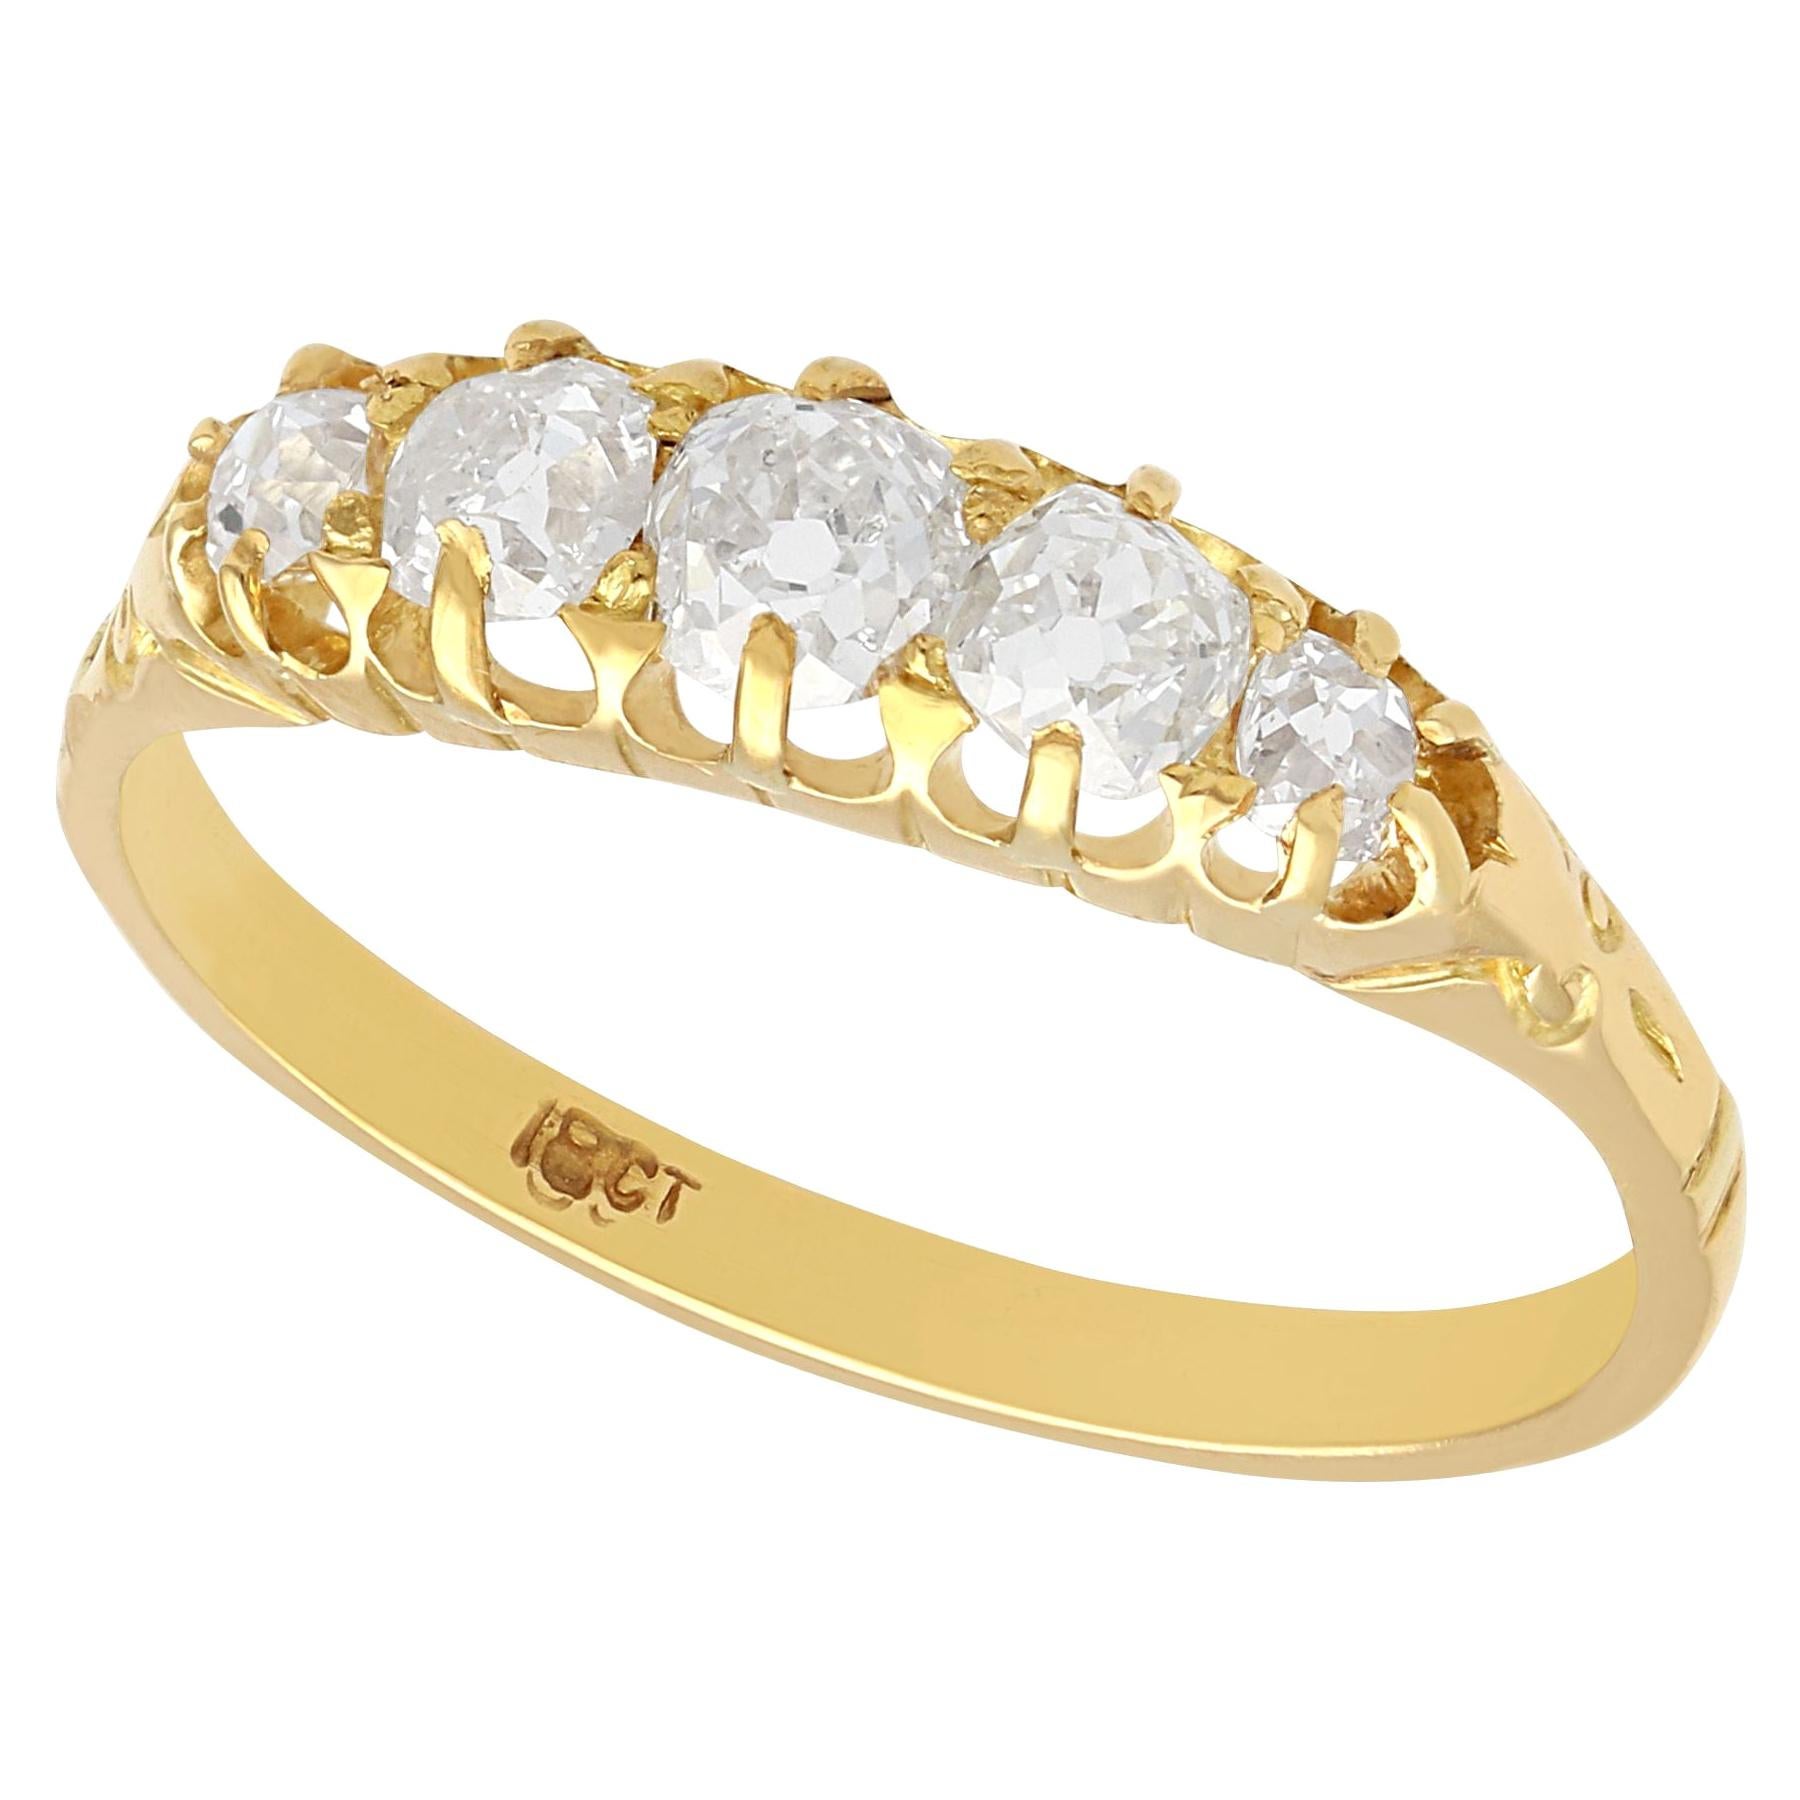 1900s Diamond and Yellow Gold Five-Stone Ring